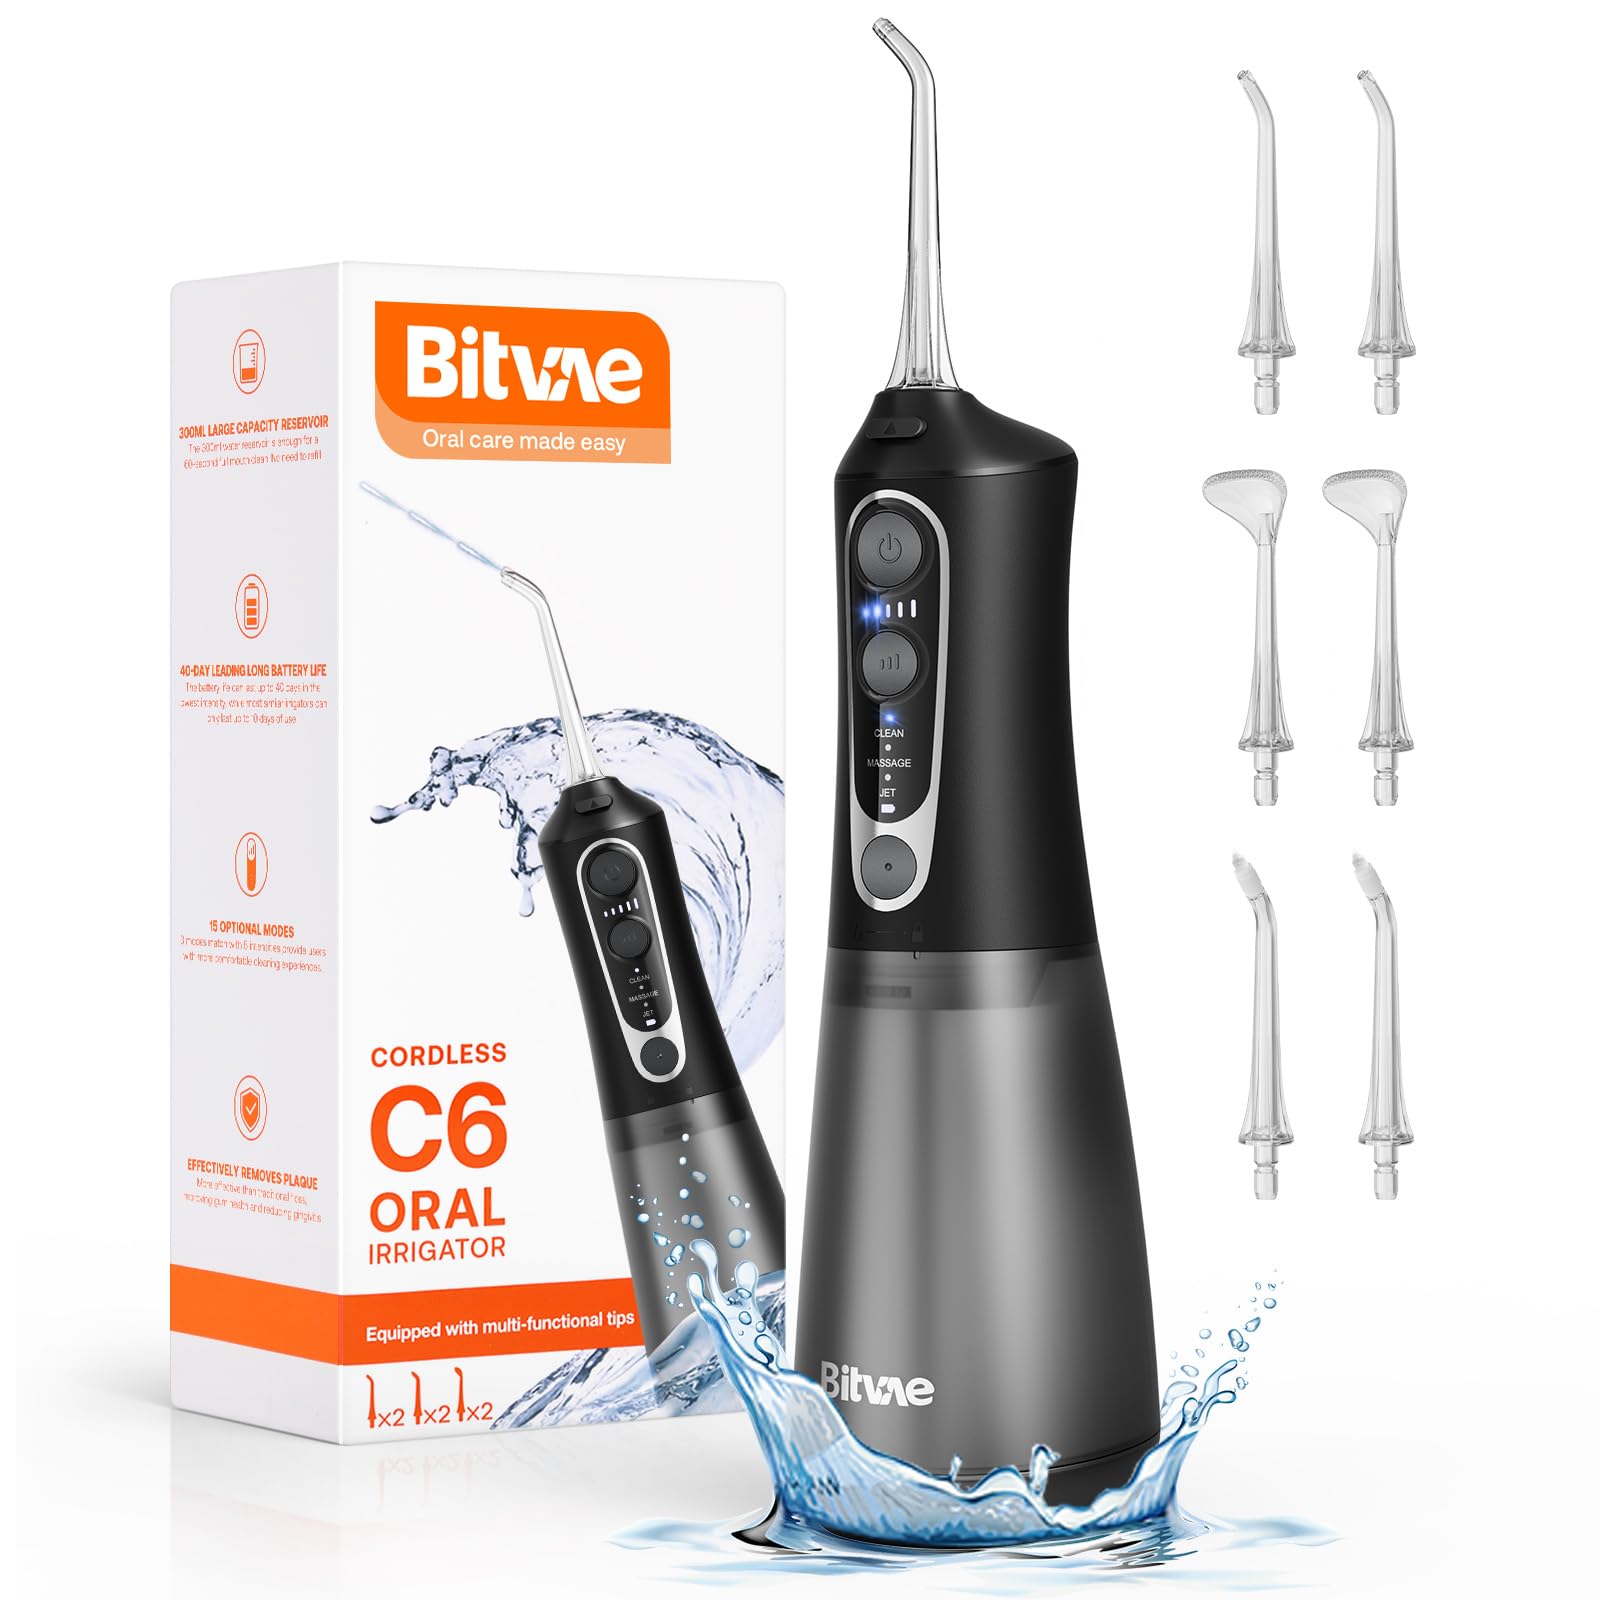 Bitvae C6 Water Flossers for Teeth - Cordless Water Dental Flosser Teeth Picks for Travel with 6 Jet Tips, 3 Modes 5 intensities, IPX7 Waterproof Portable & Rechargeable,$27.19